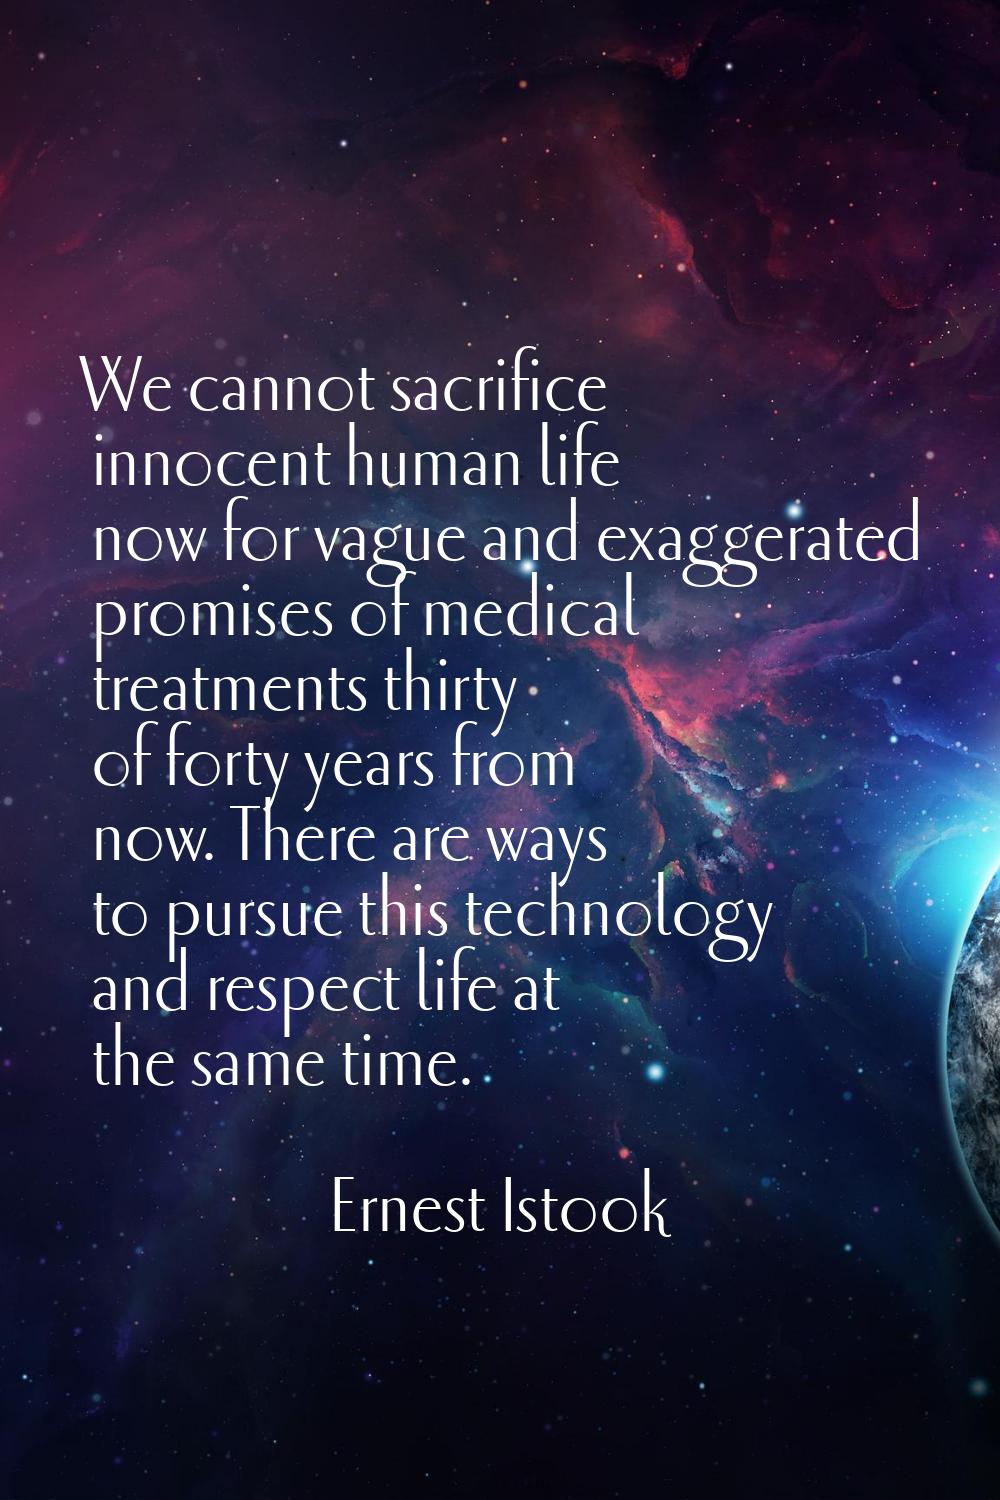 We cannot sacrifice innocent human life now for vague and exaggerated promises of medical treatment